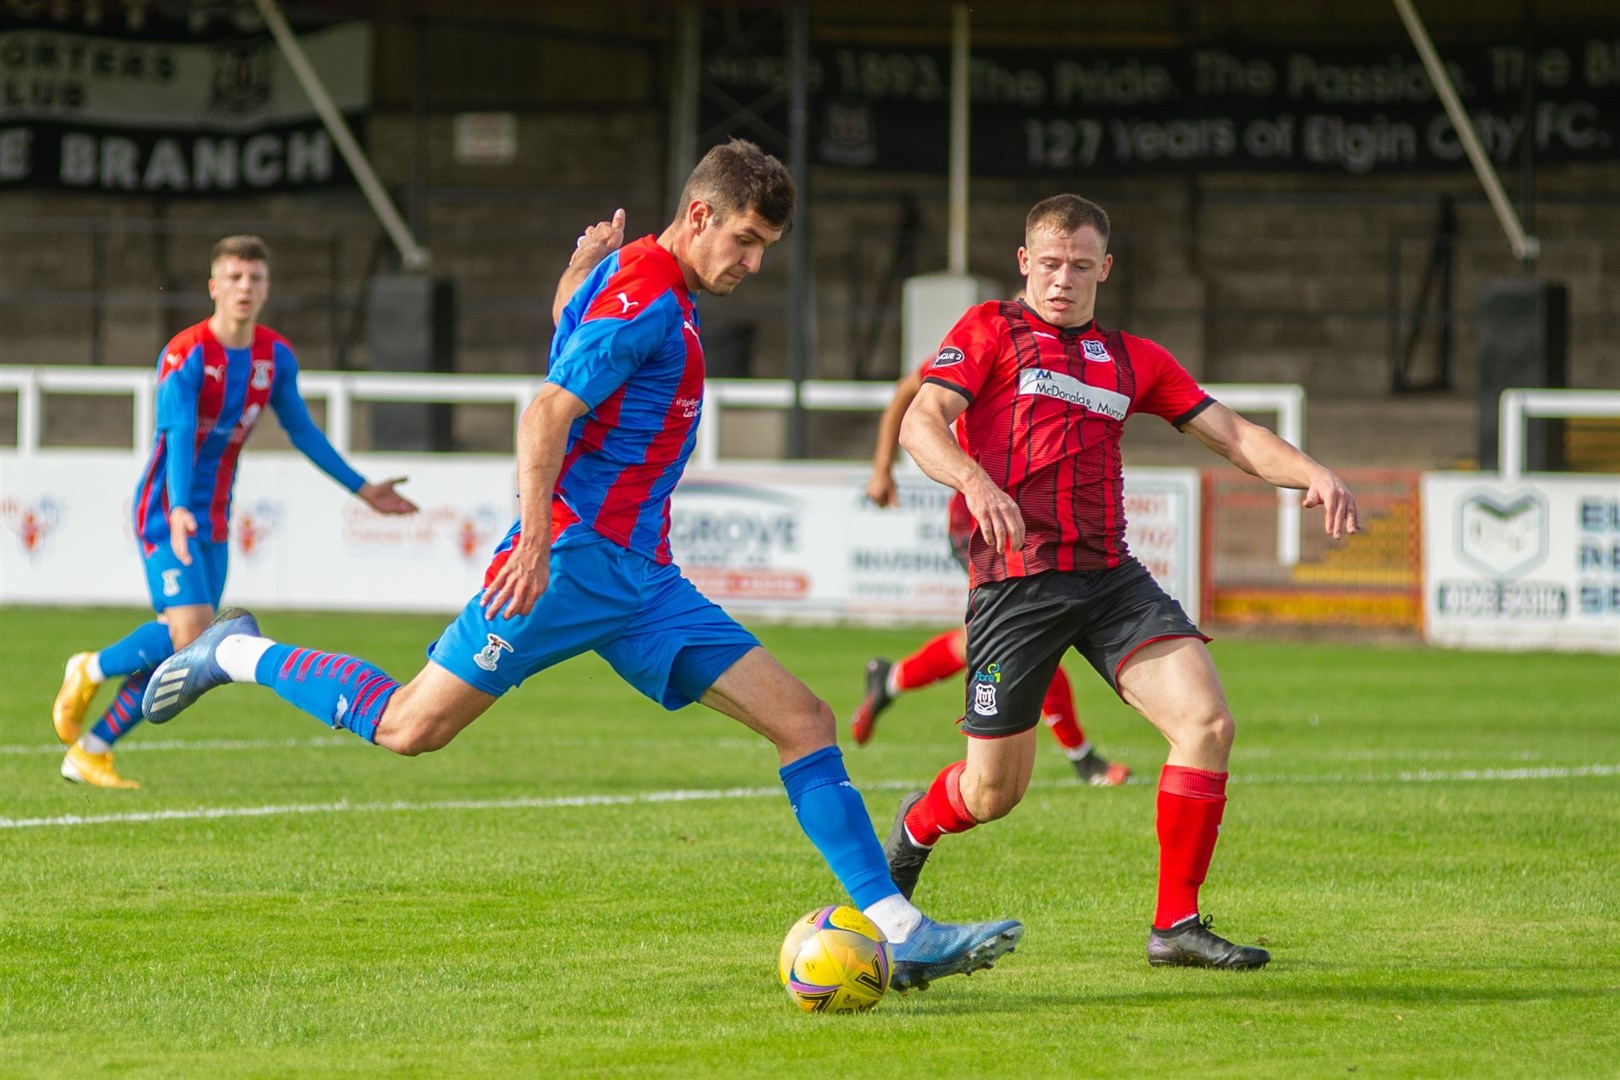 Elgin City centre back Angus Mailer closes in on Inverness Caley Thistle forward Nikolay Todorov. Picture: Daniel Forsyth..